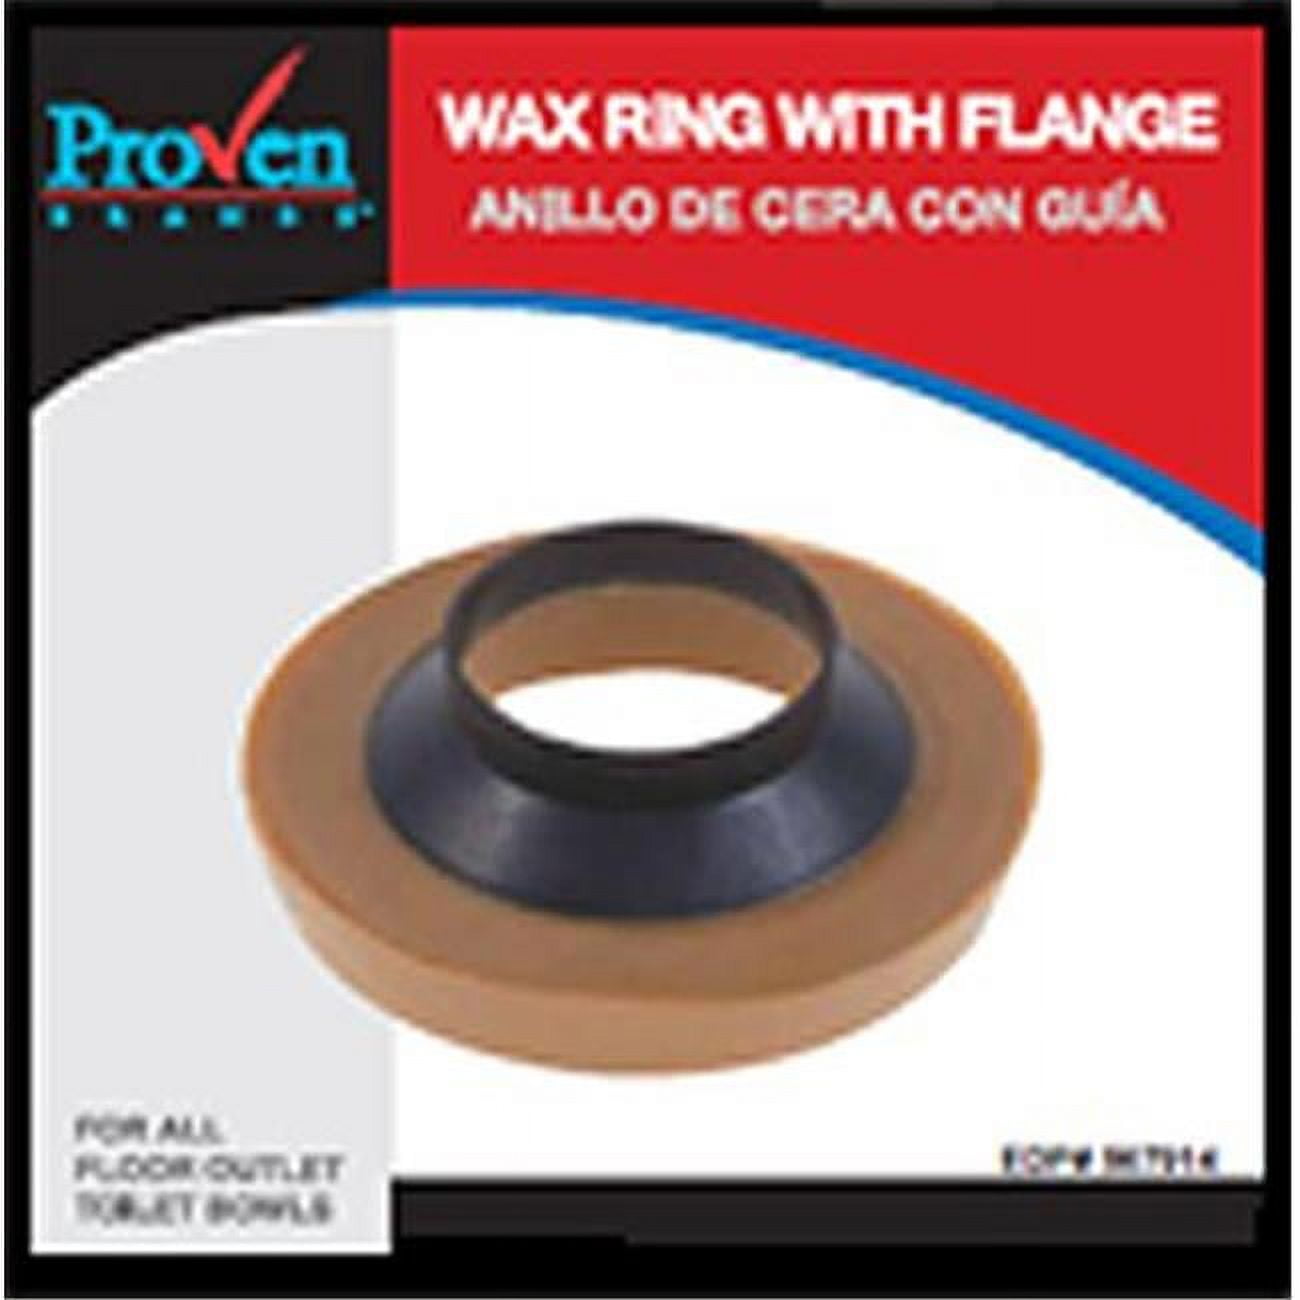 567914 3x 4 In. Ring Wax With Flange